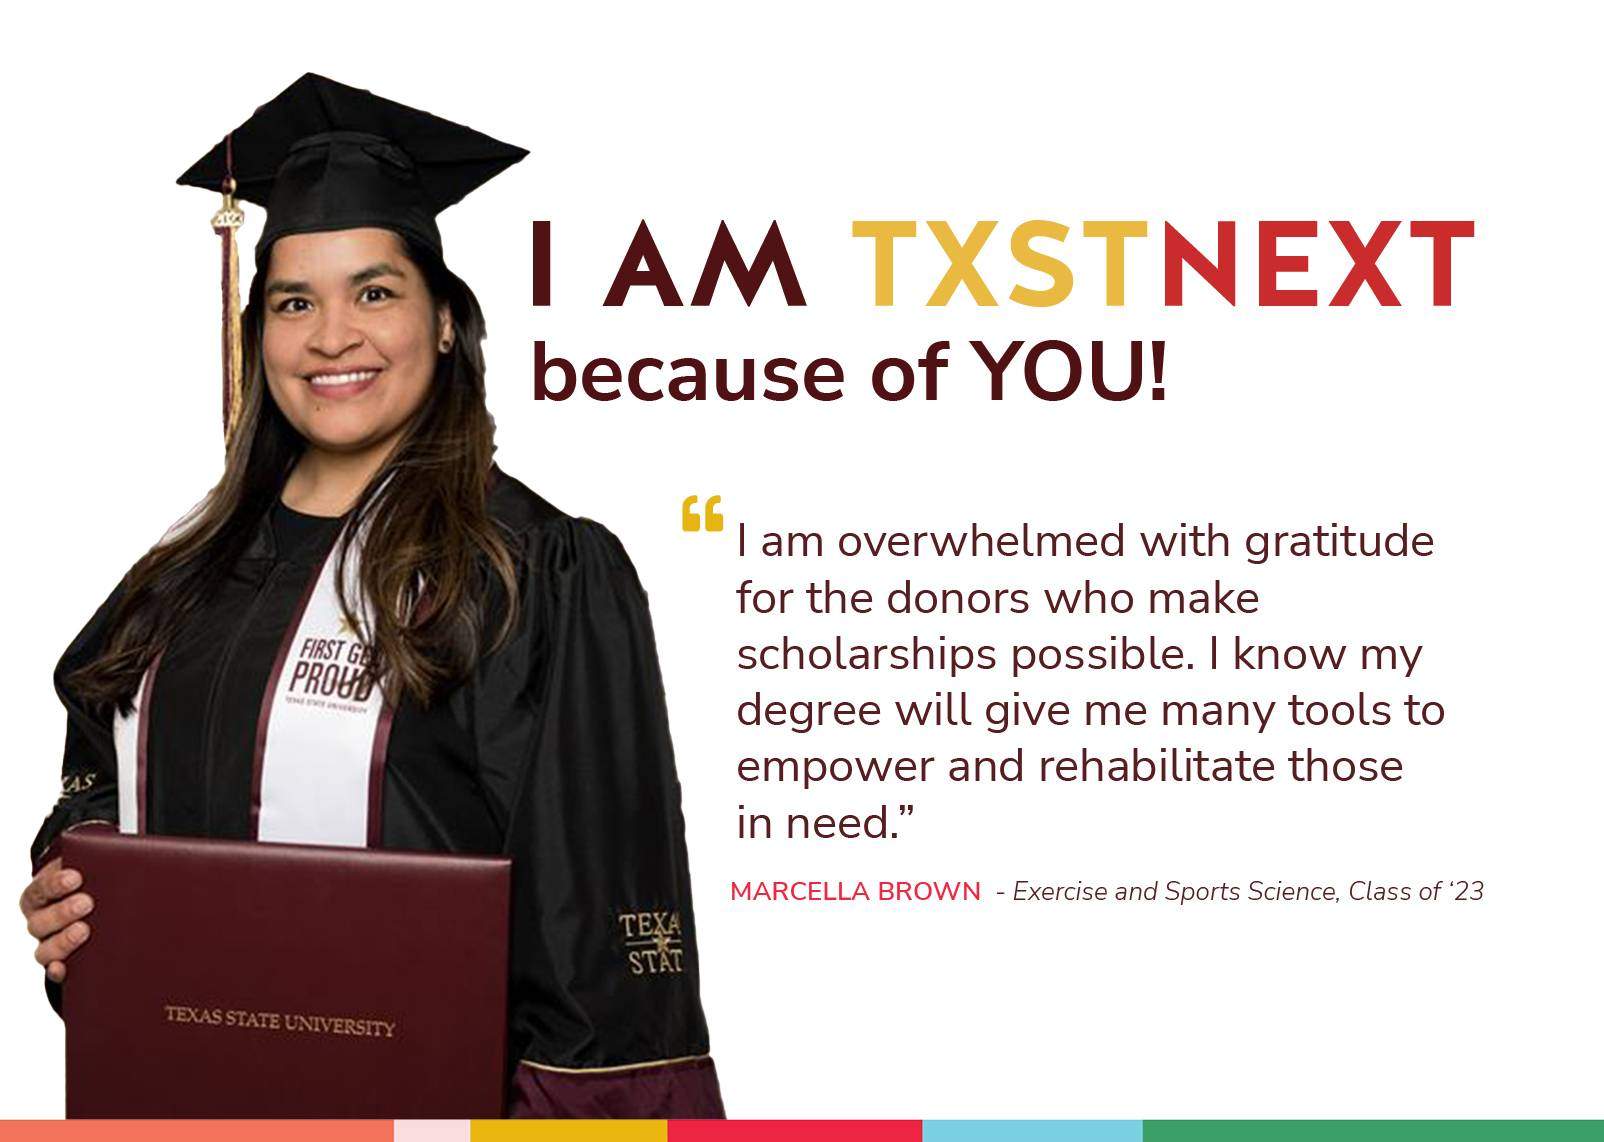 2023 grad appeal- I am TXST NEXT because of you